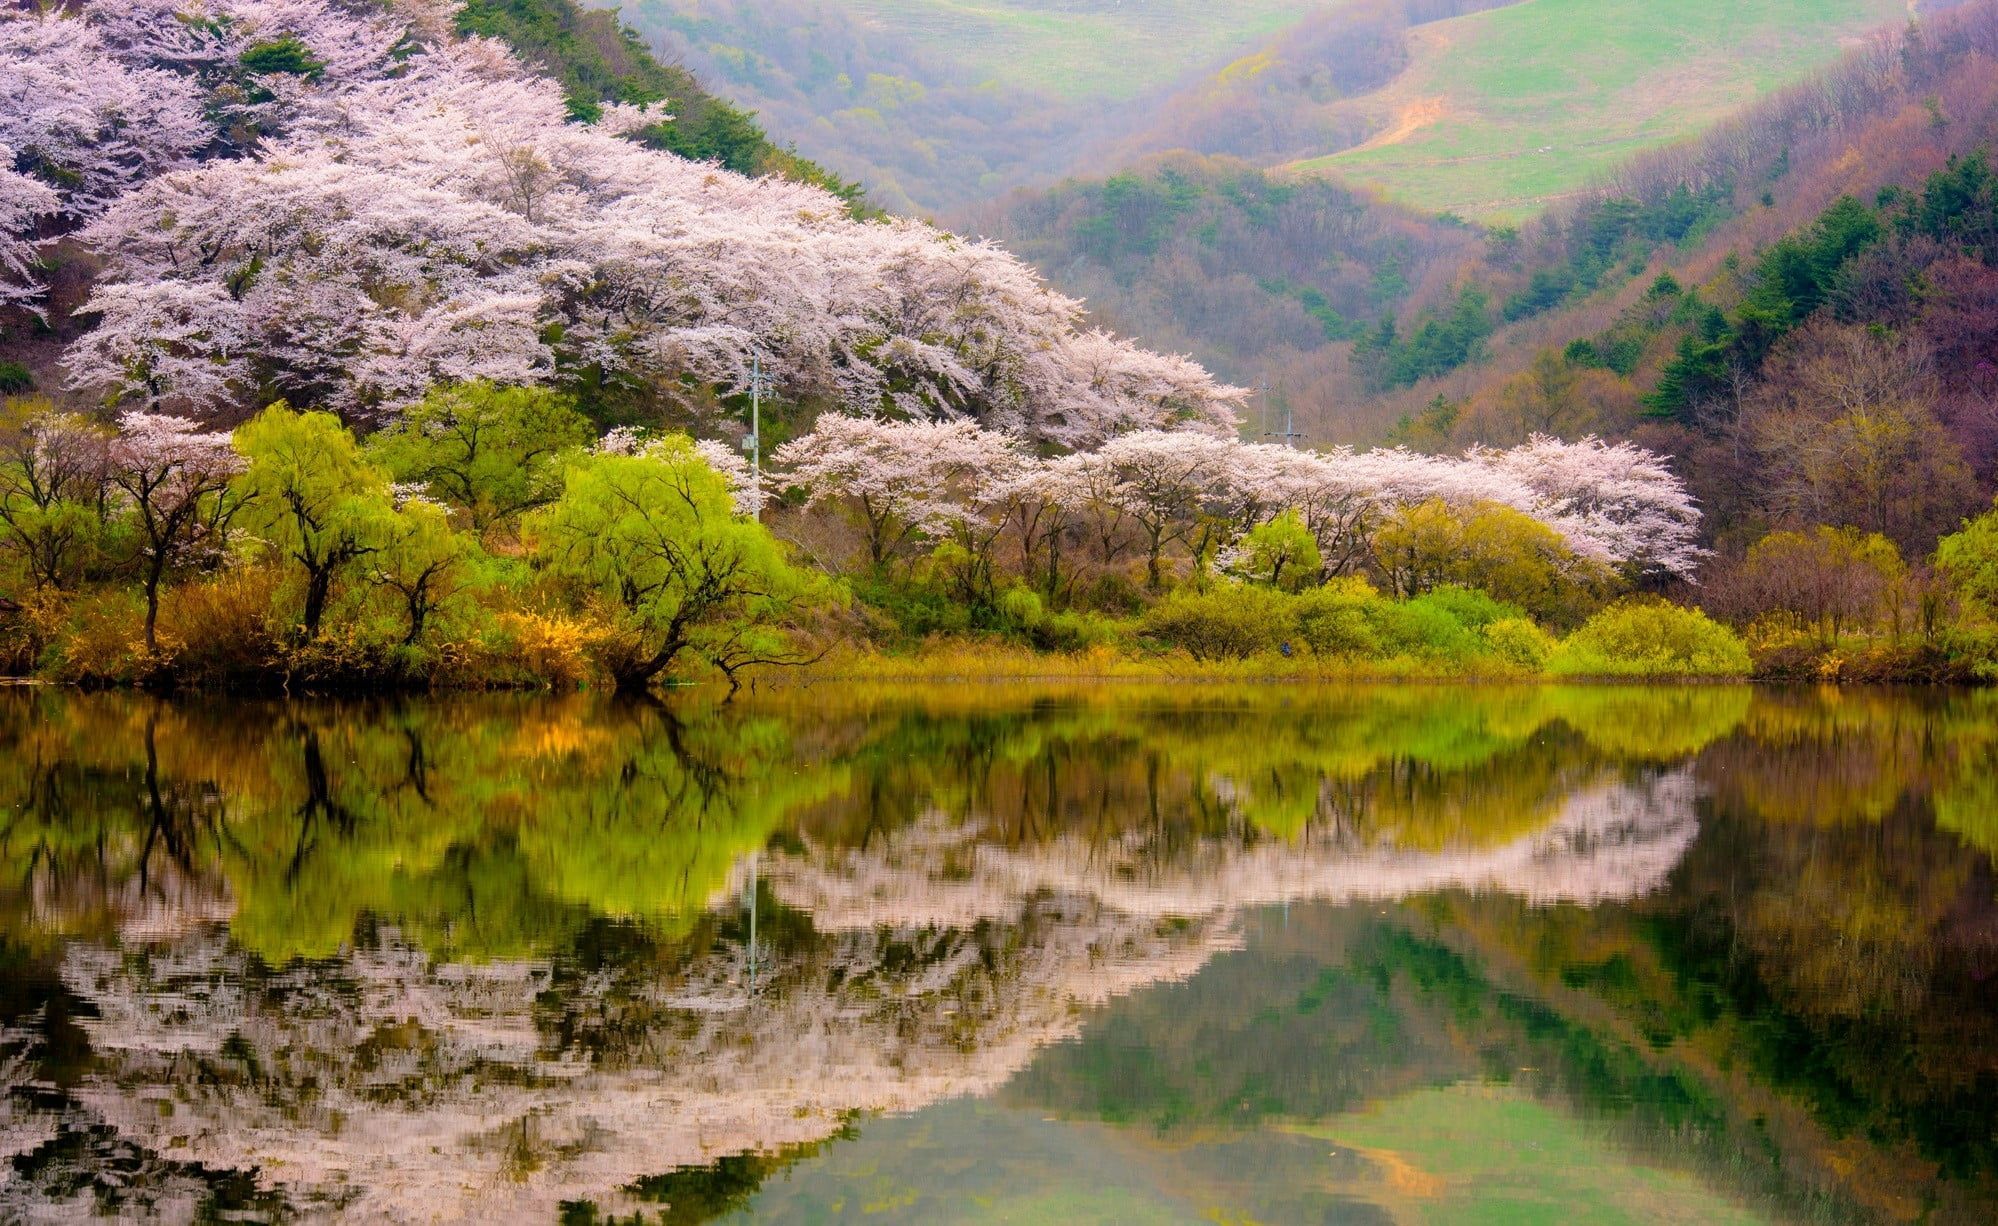 Green Leafed Trees #spring #forest #mountains #lake #reflection #blossoms #trees #nature #landscape P #wallpaper. Spring Forest, Nature Wallpaper, Landscape